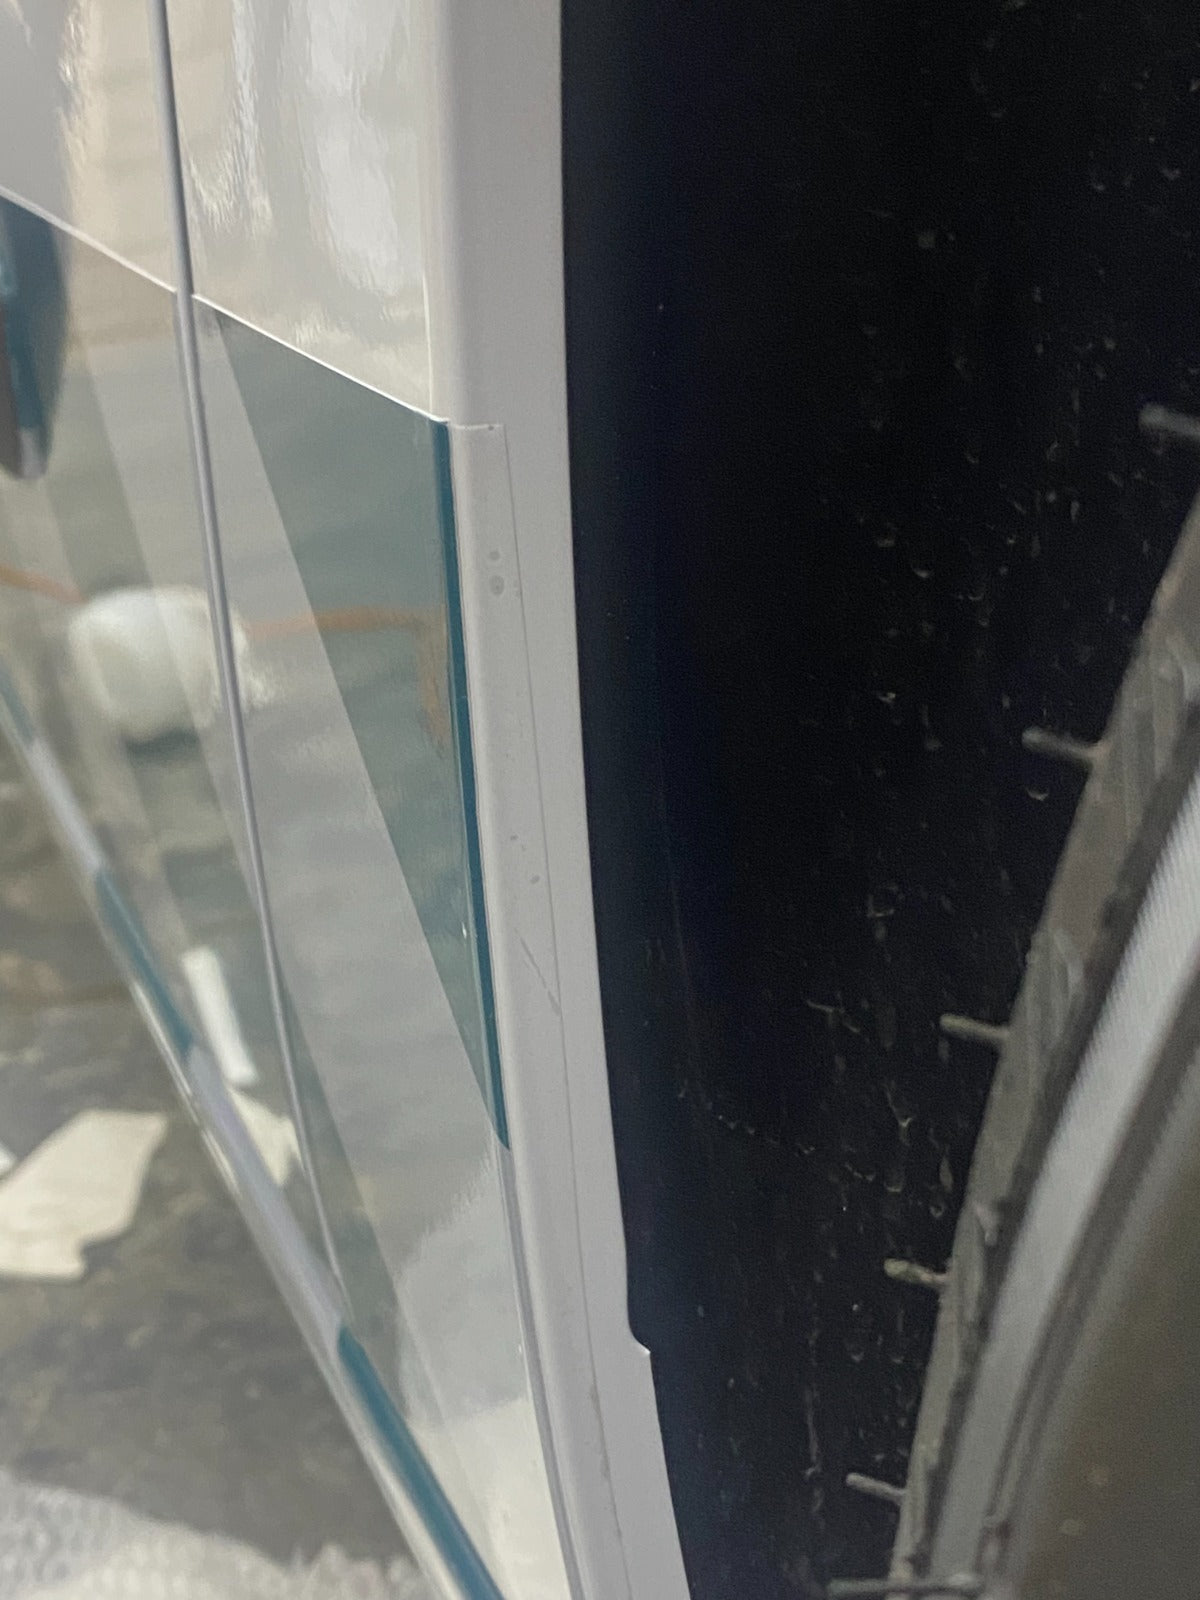 ORACAL Edge Sealer Tape showing it finish on a van